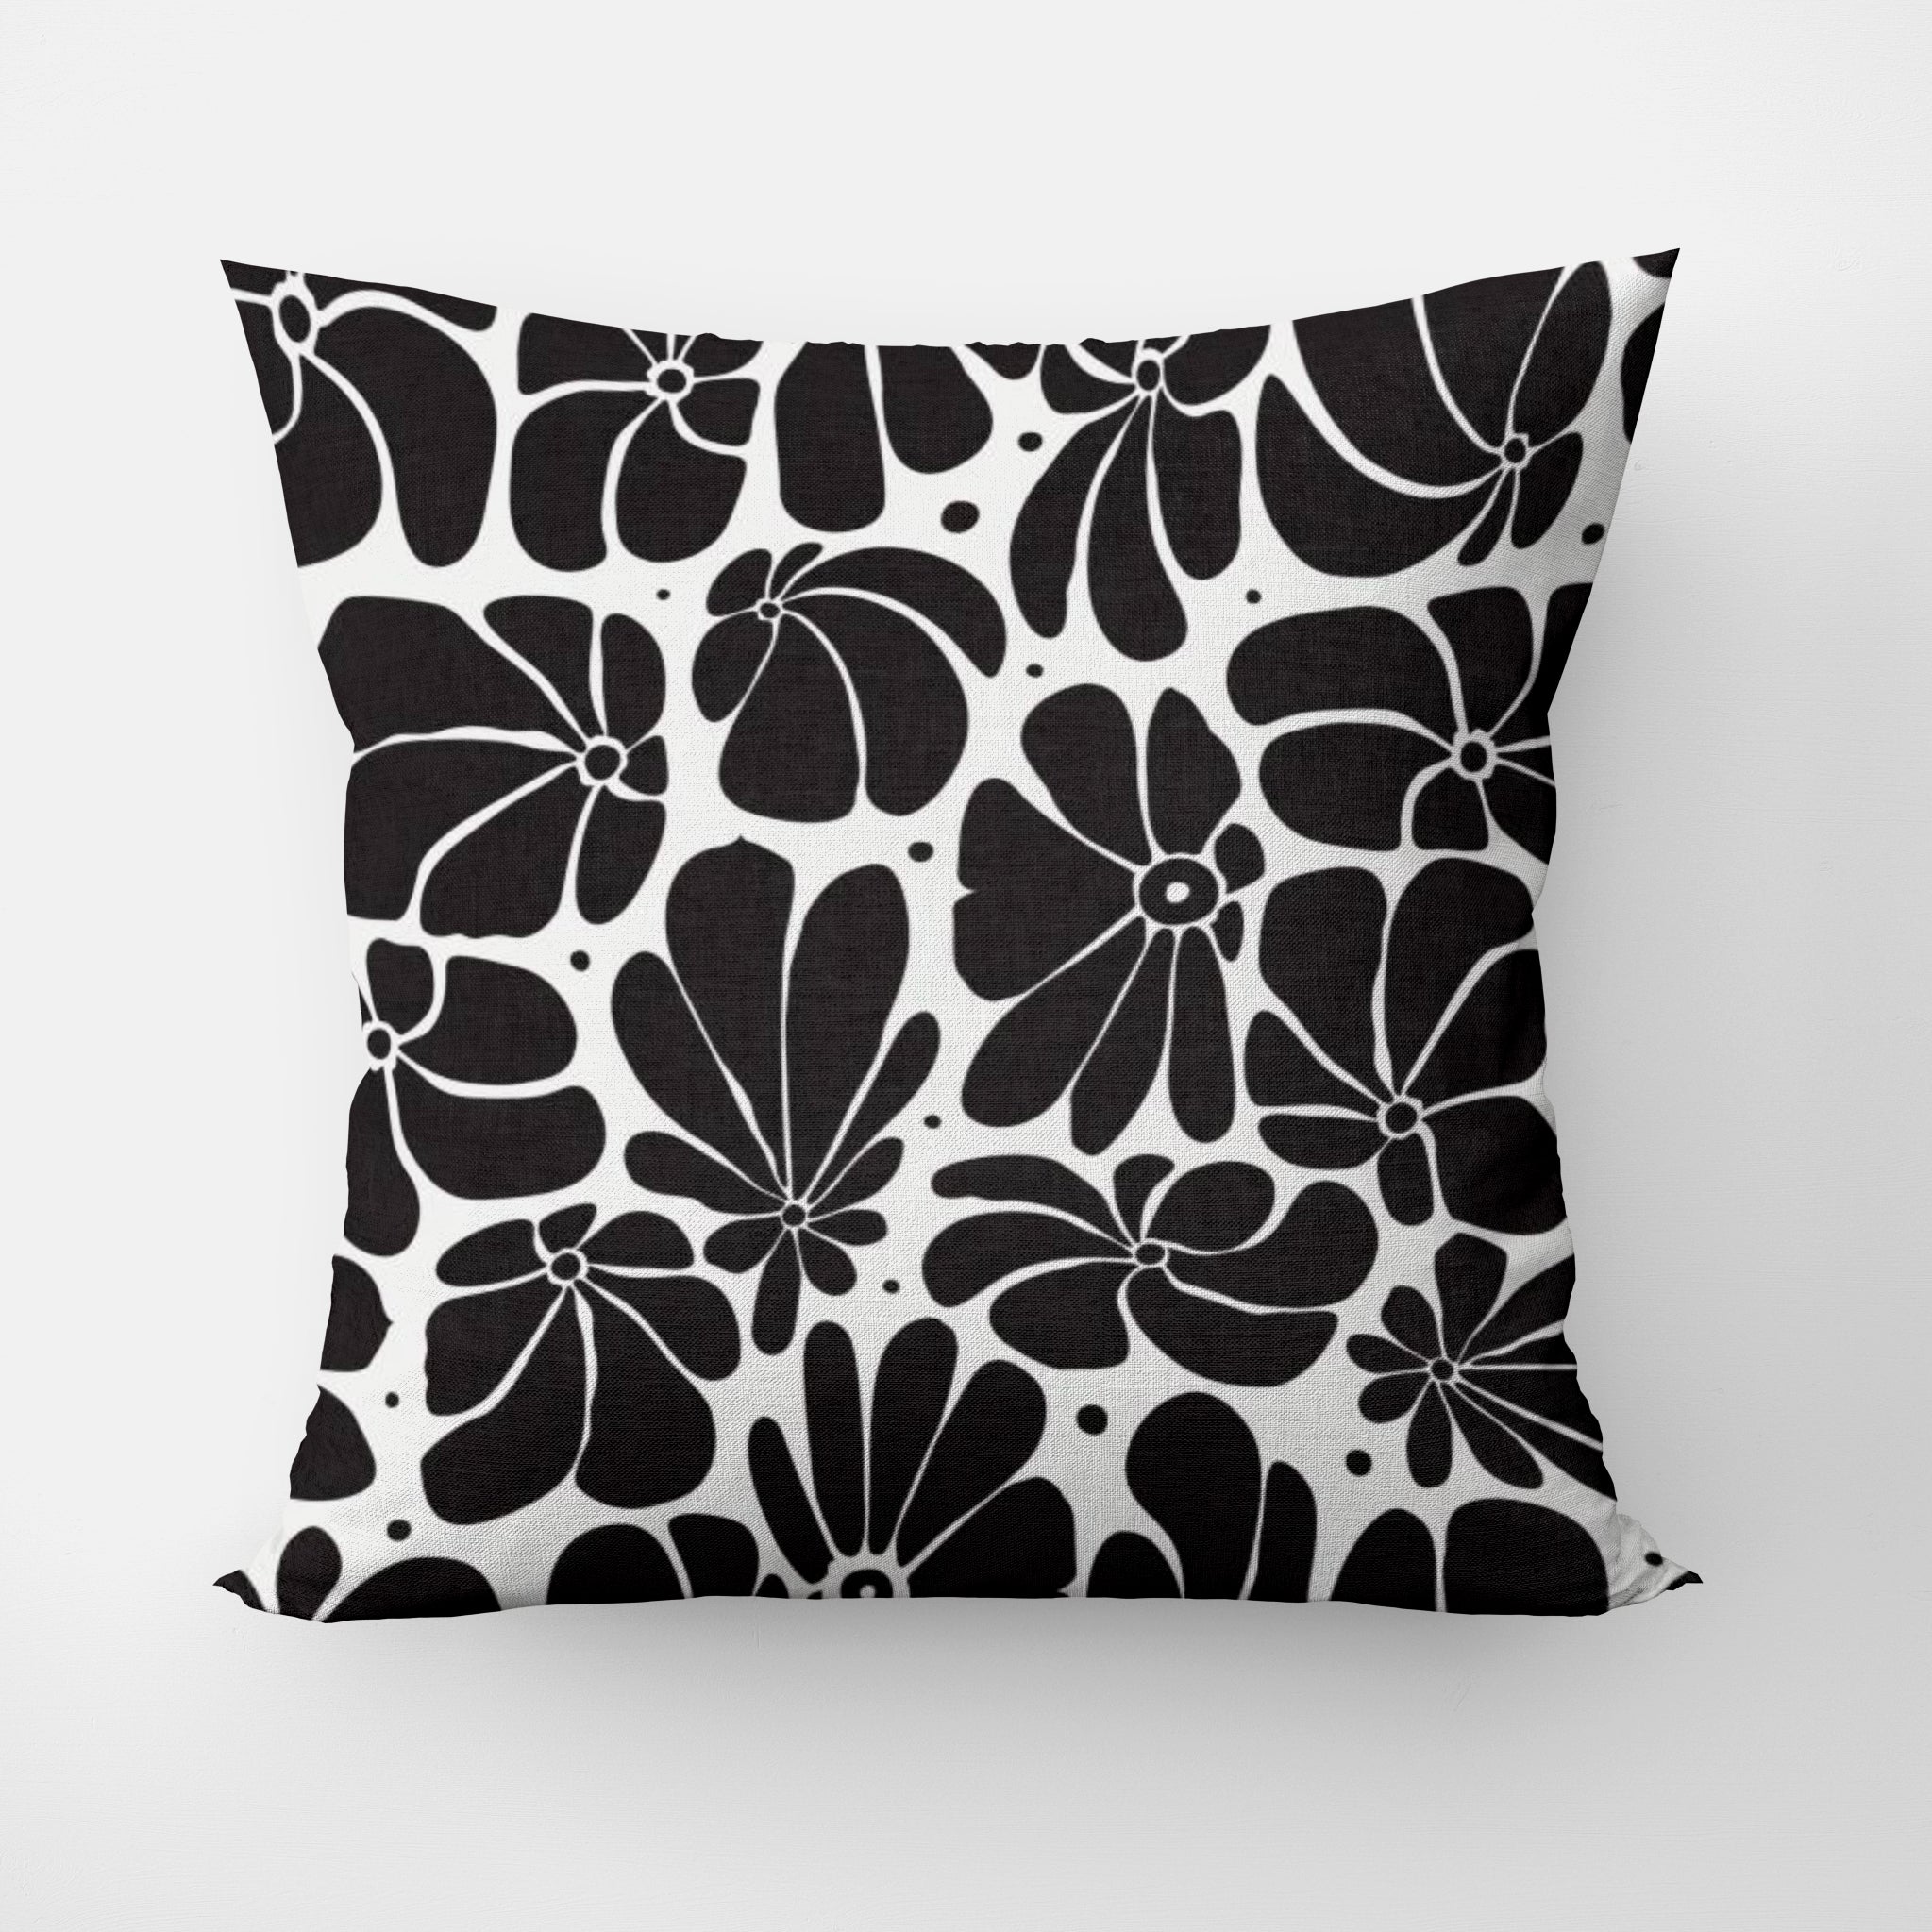 Abstract Black White Retro 70s Floral Throw Pillow Cover BLOSSOM